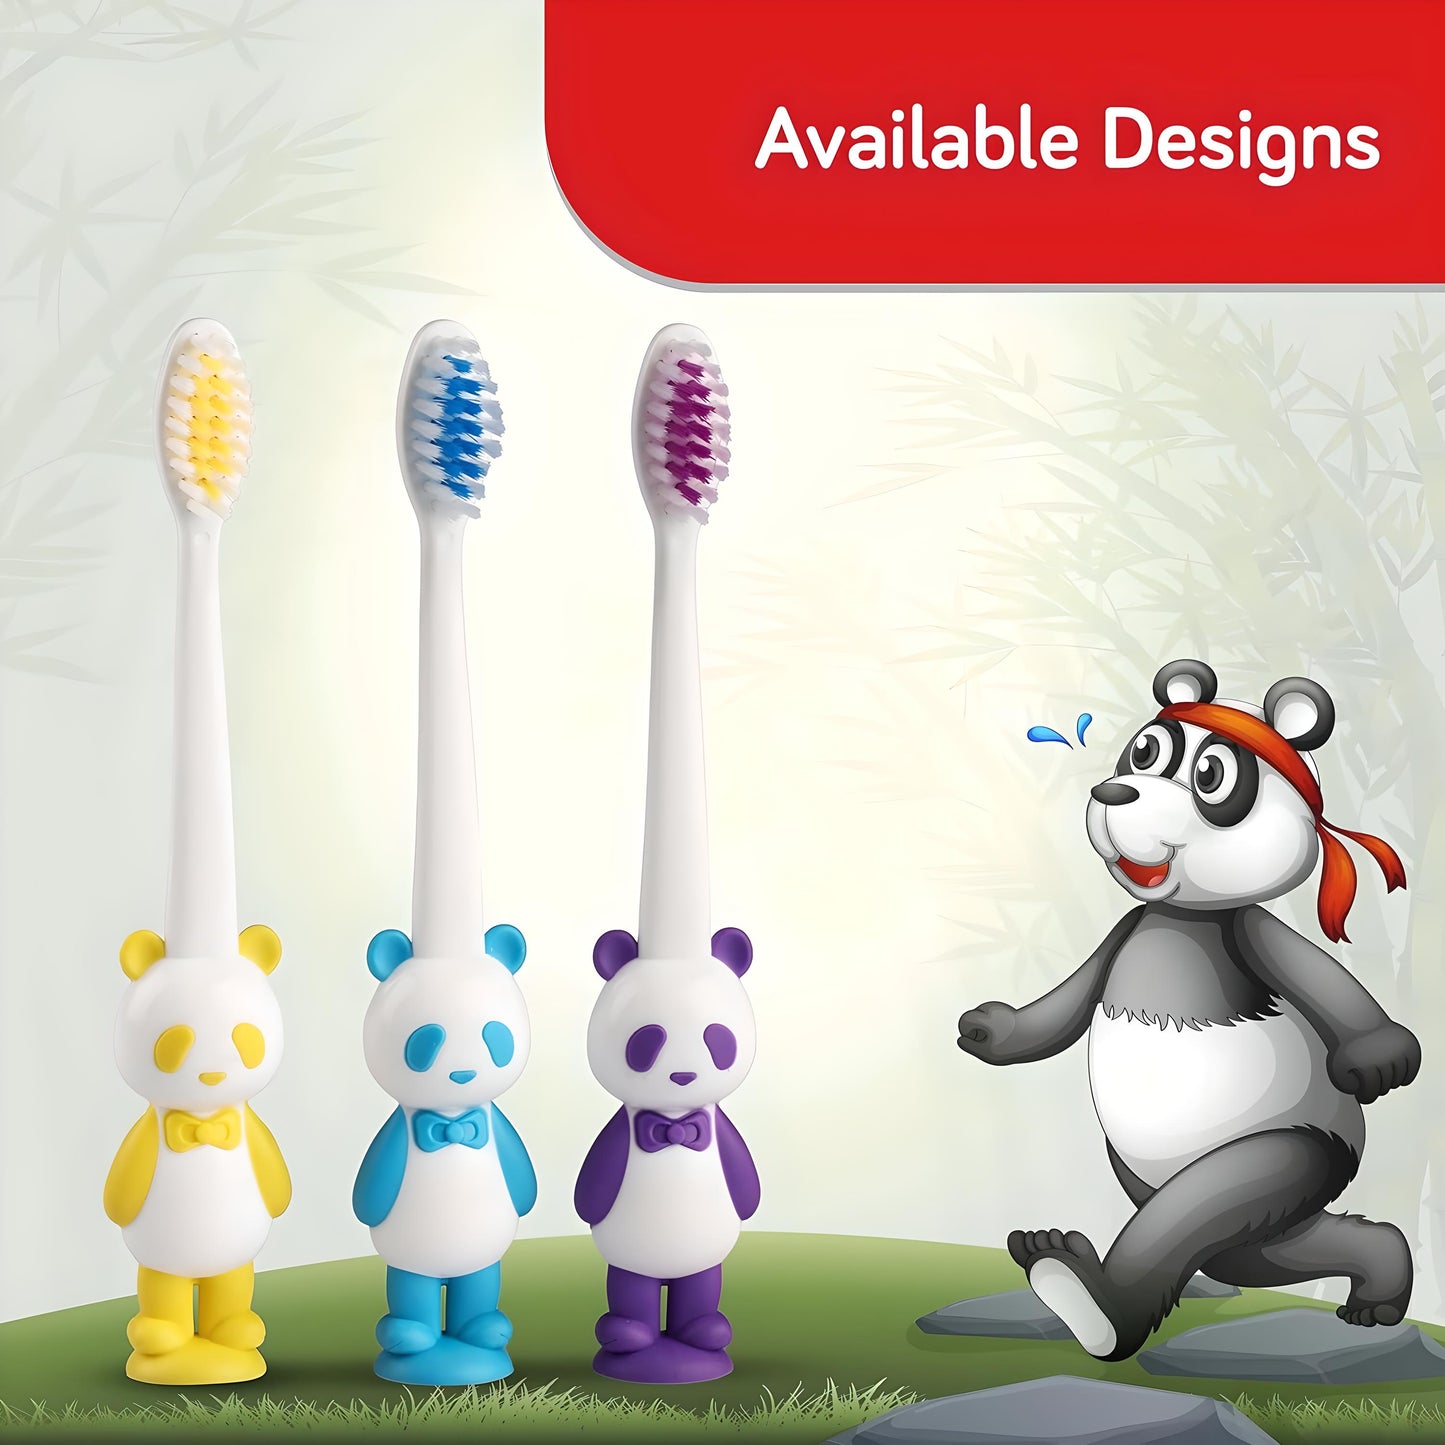 LuvLap Panda Manual Toothbrush for Baby & Kids, Ultra Soft Micro Nano Floss Bristle, BPA Free, Suction Cup, Boys & Girls' Toddler Toothbrush, Tongue Scrapper on Head, Multicolor, 18M+